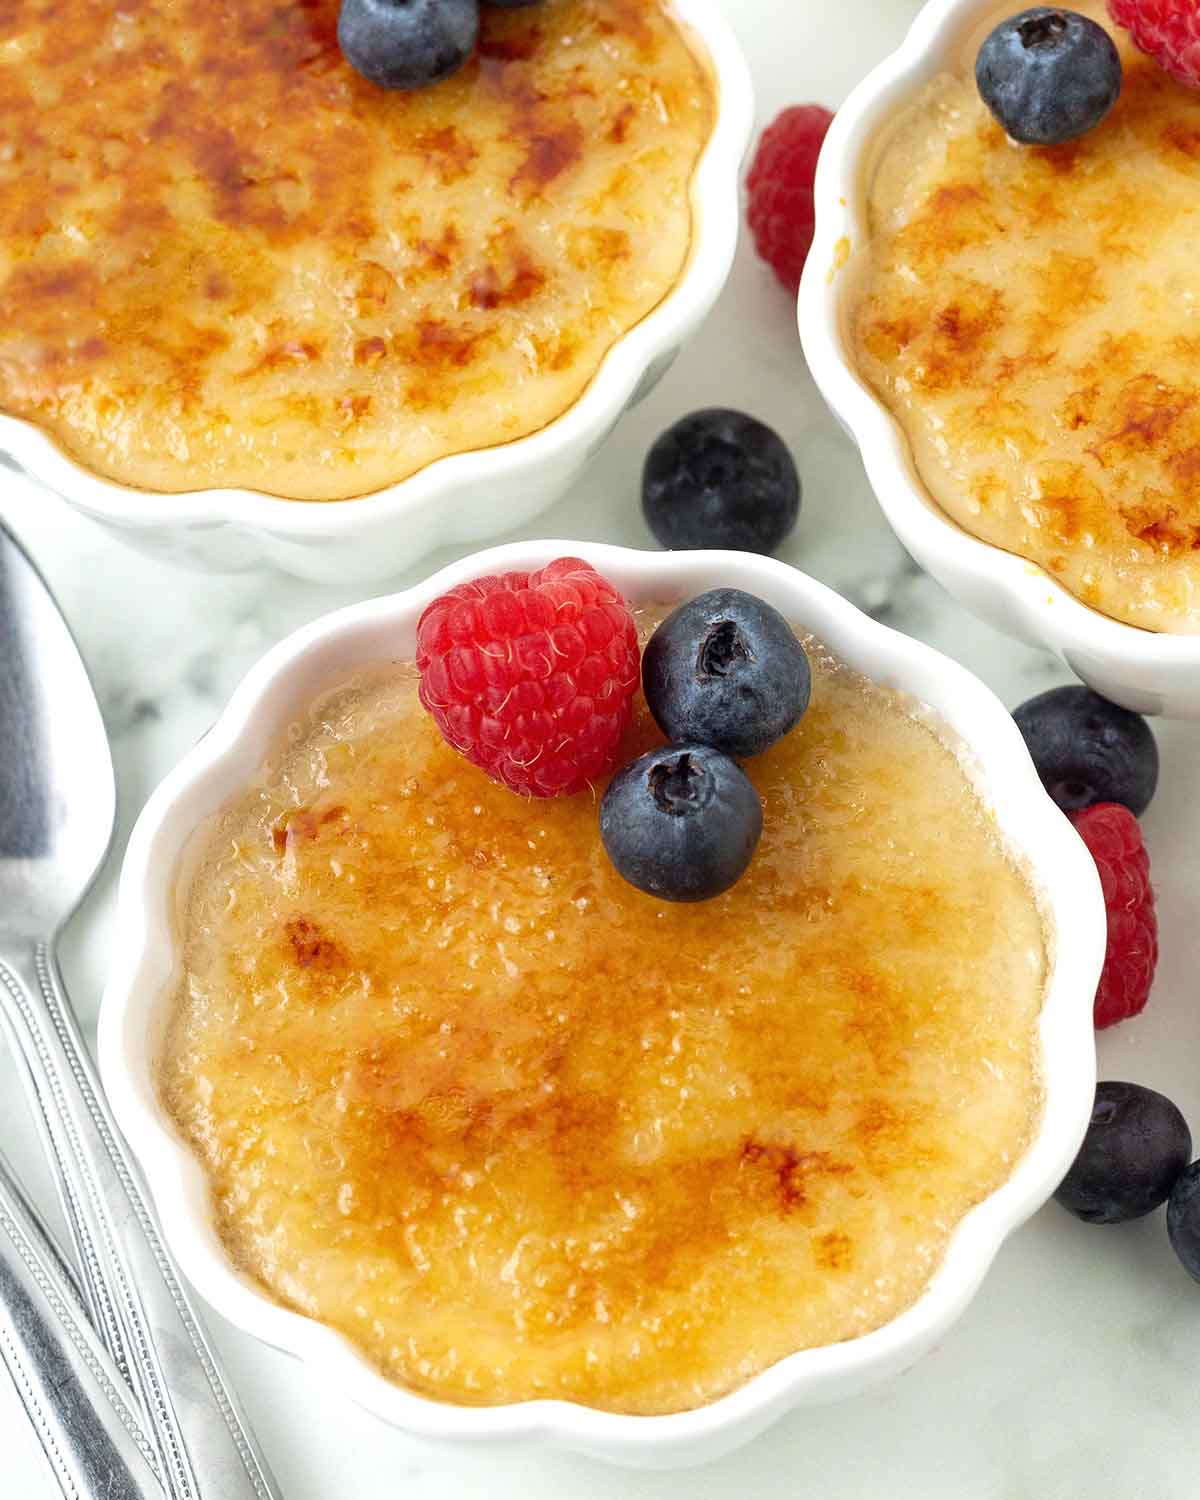 Three ramekins holding vegan crème brulee, the sugar has been caramelized and there are fresh berries on top for garnish.